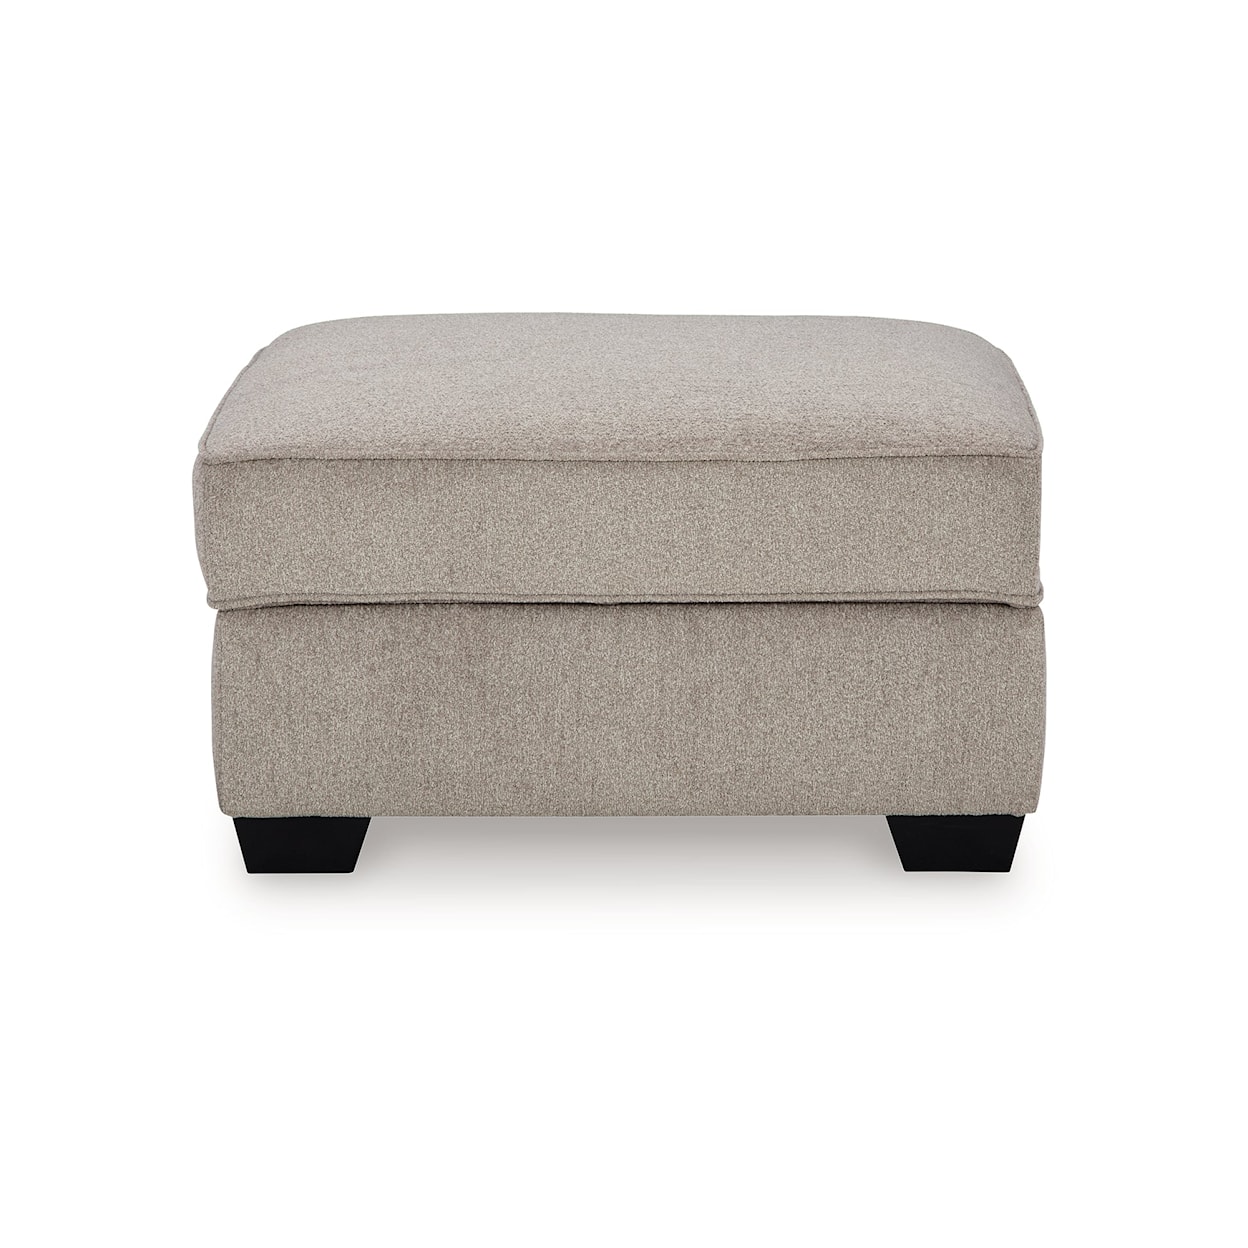 Signature Claireah Ottoman With Storage